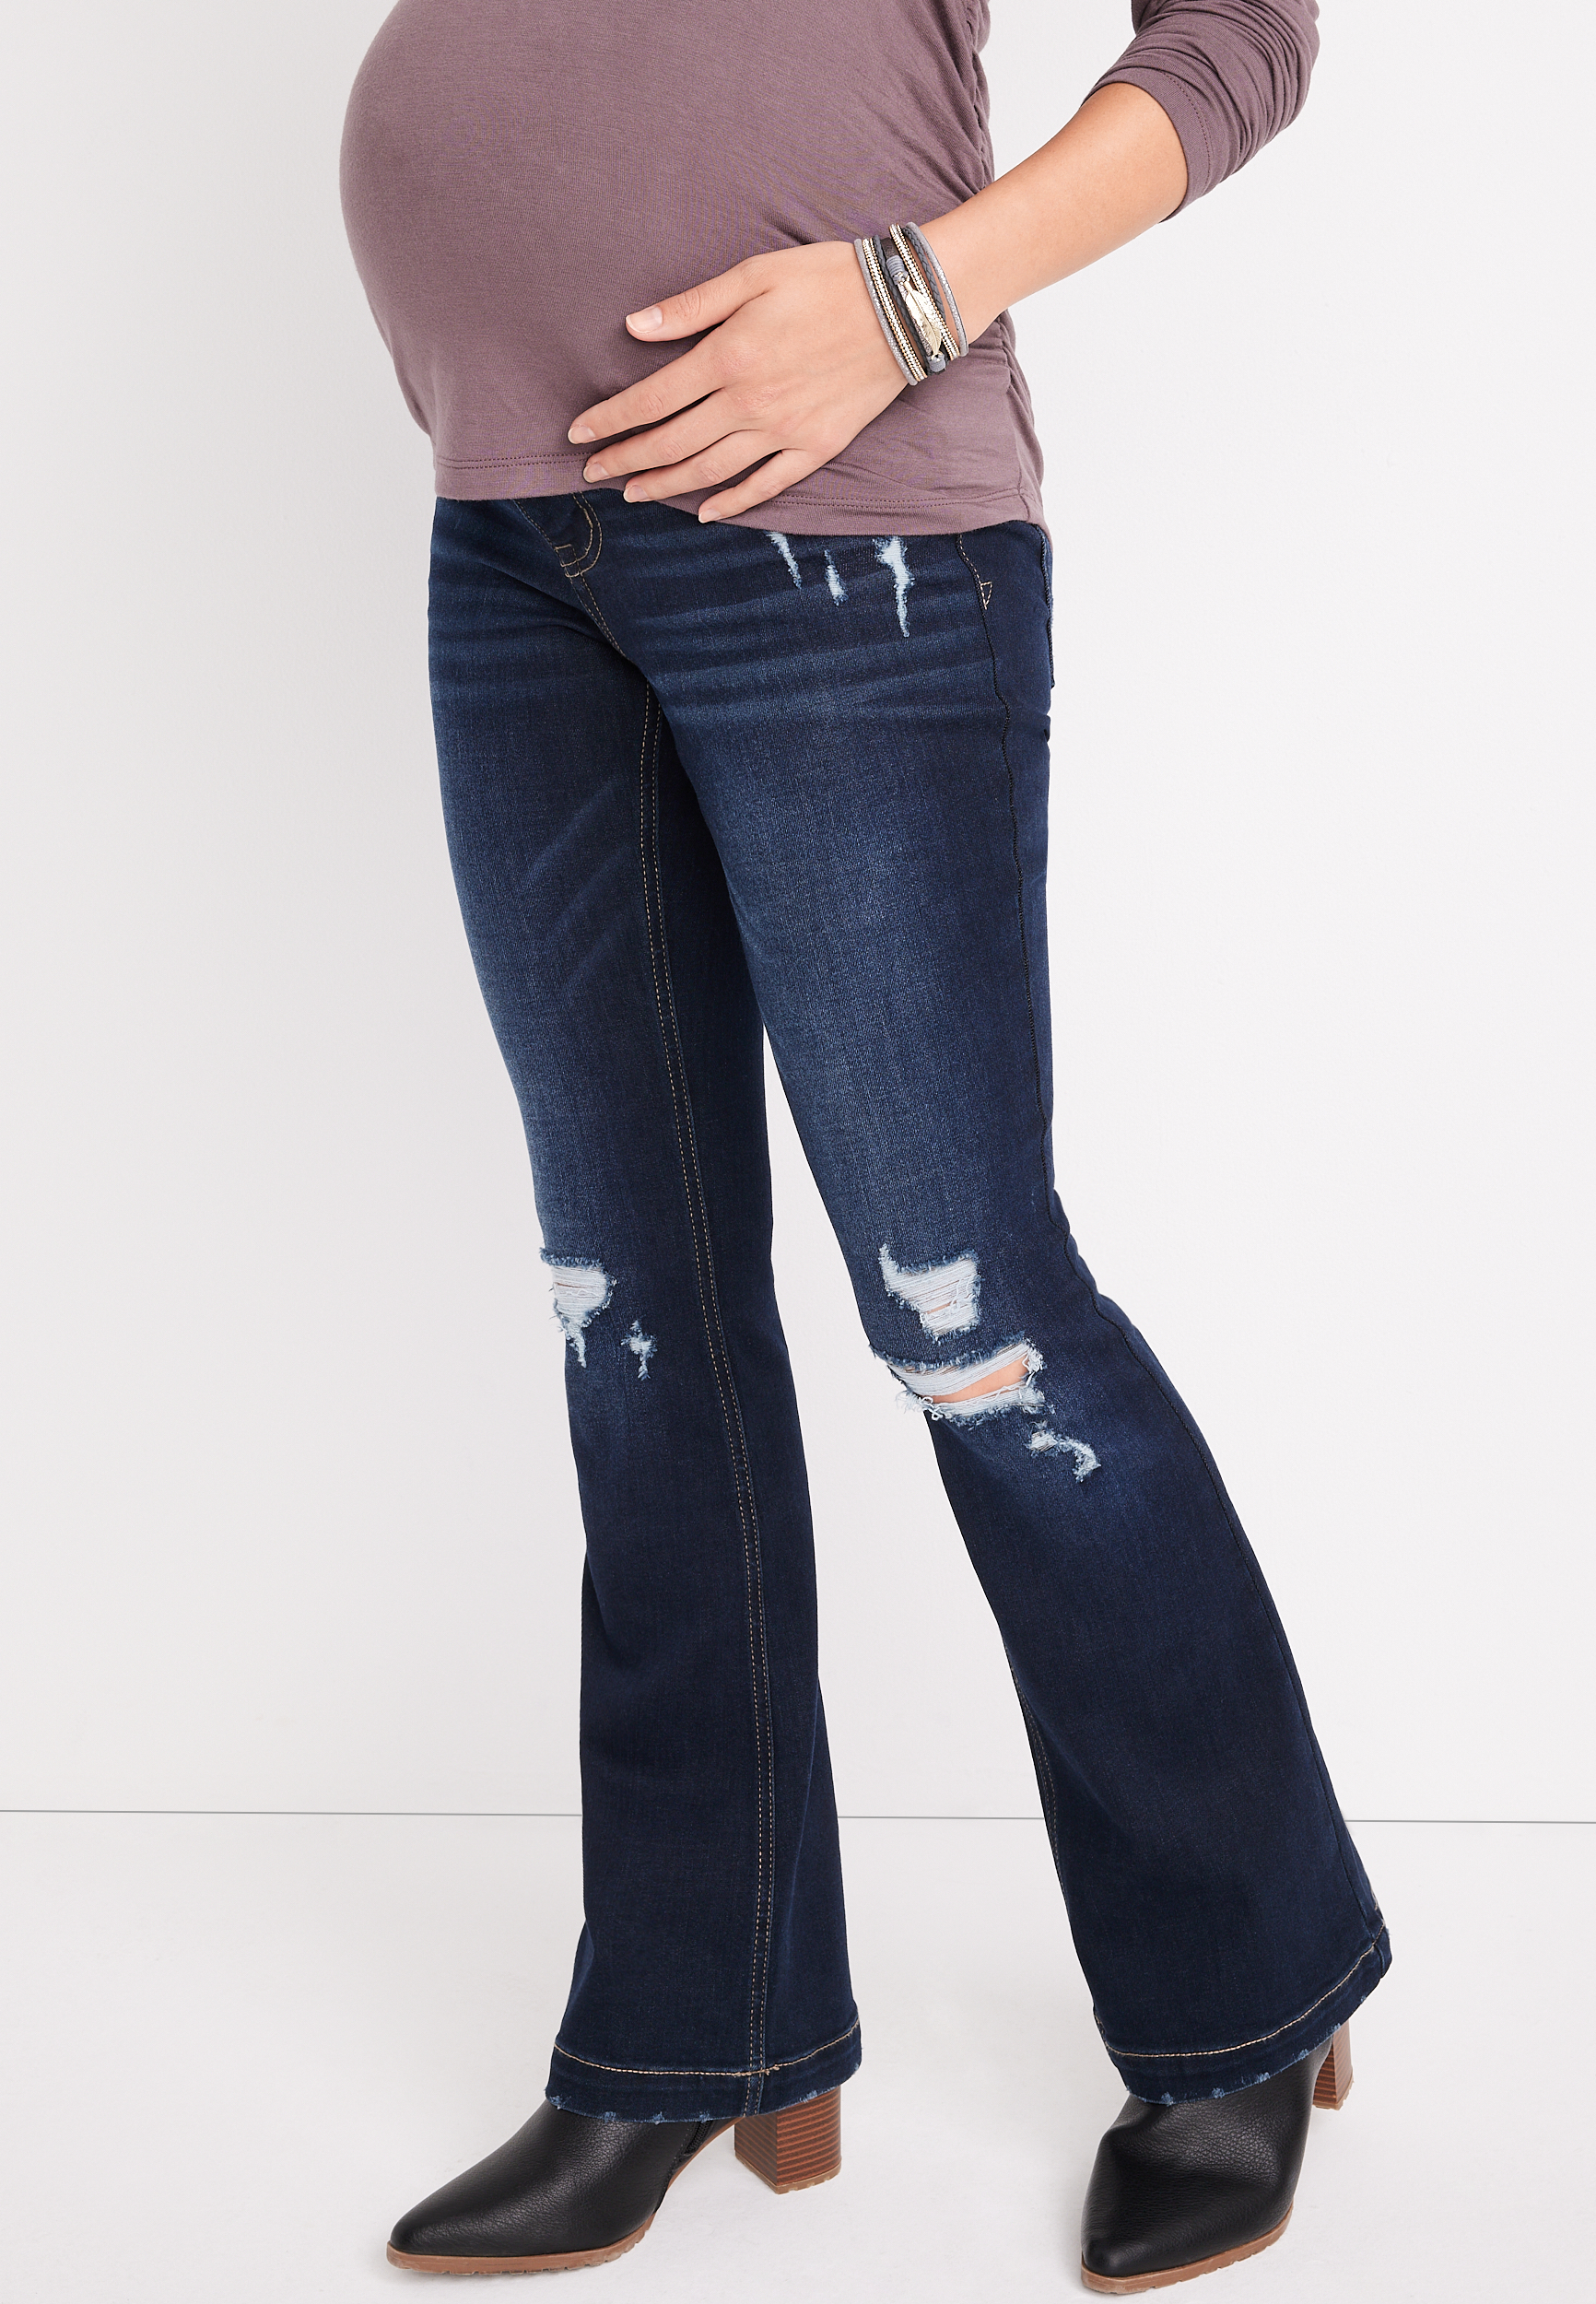 m jeans by maurices™ Over The Bump Ripped Denim Maternity Jegging